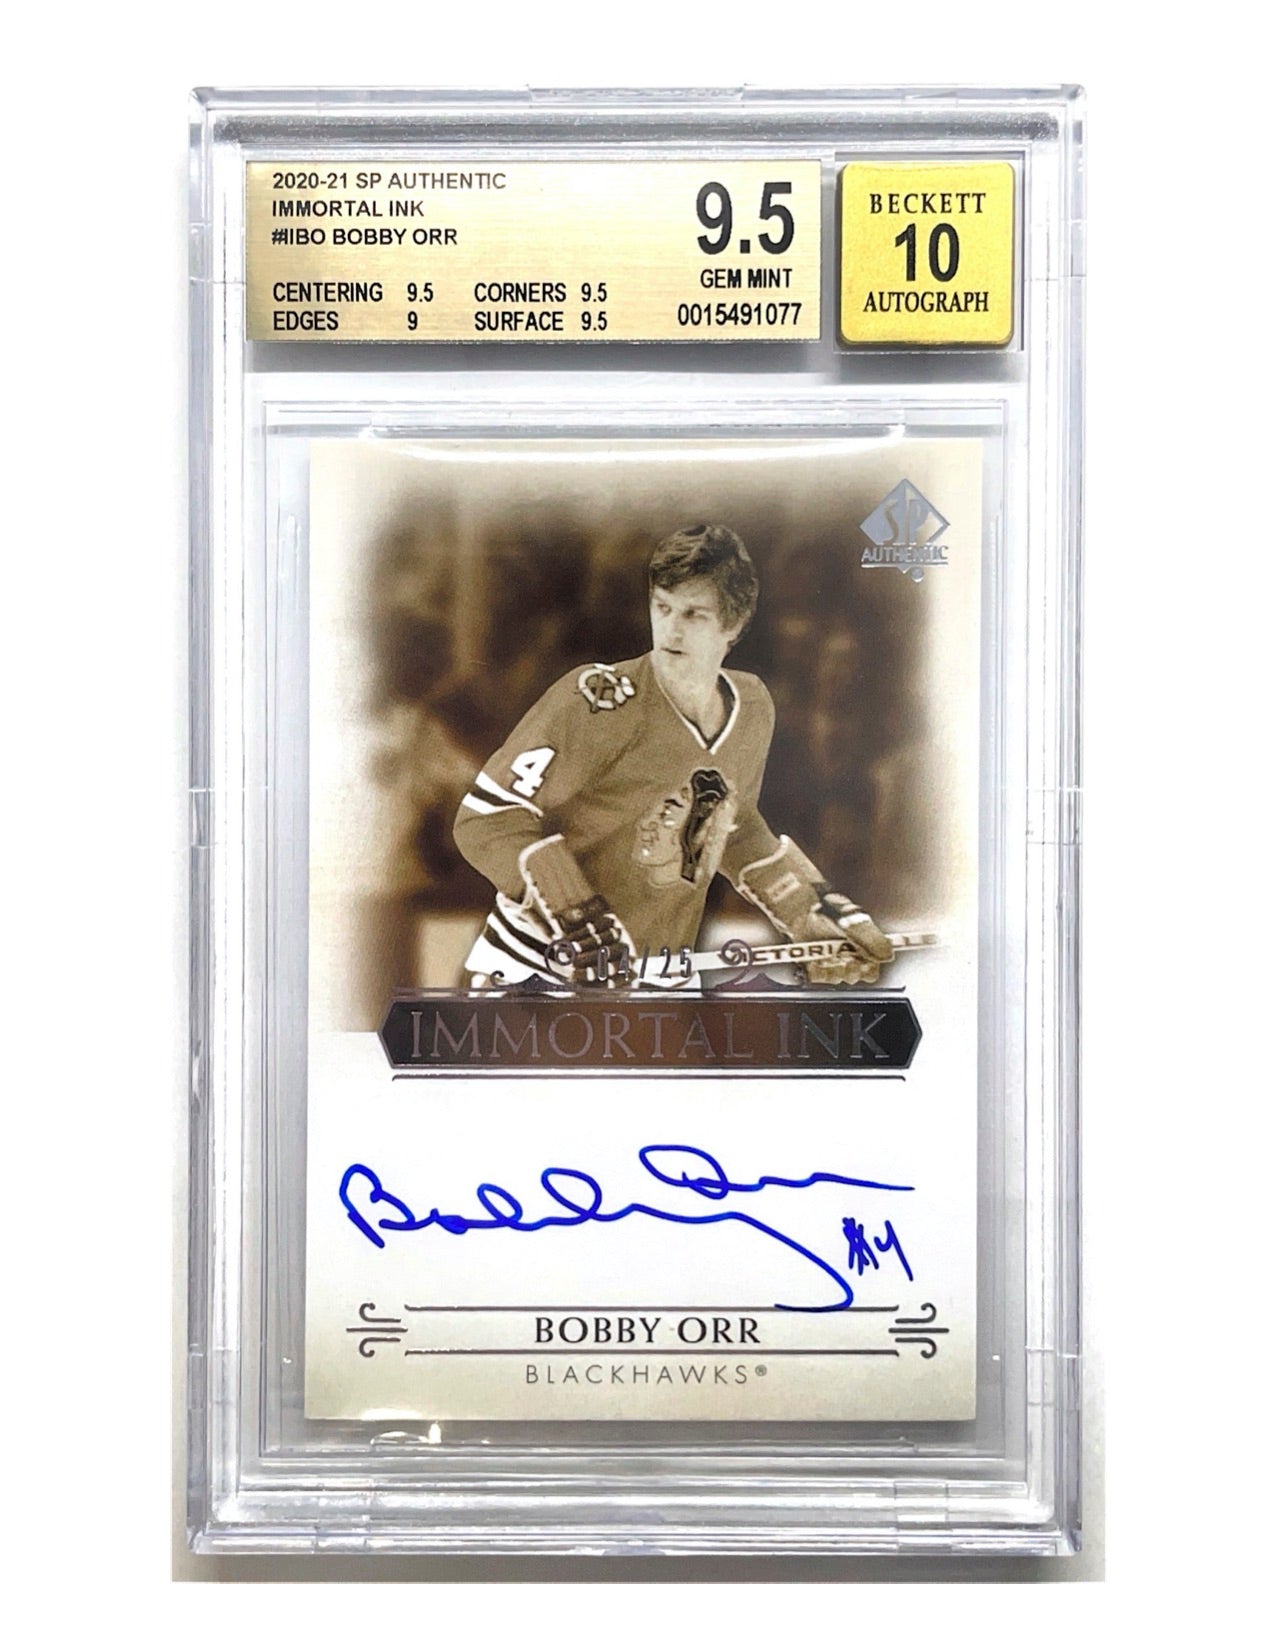 Bobby Orr 2020-21 Upper Deck SP Authentic Immortal Ink Autograph #II-BO - 04/25 - BGS 9.5